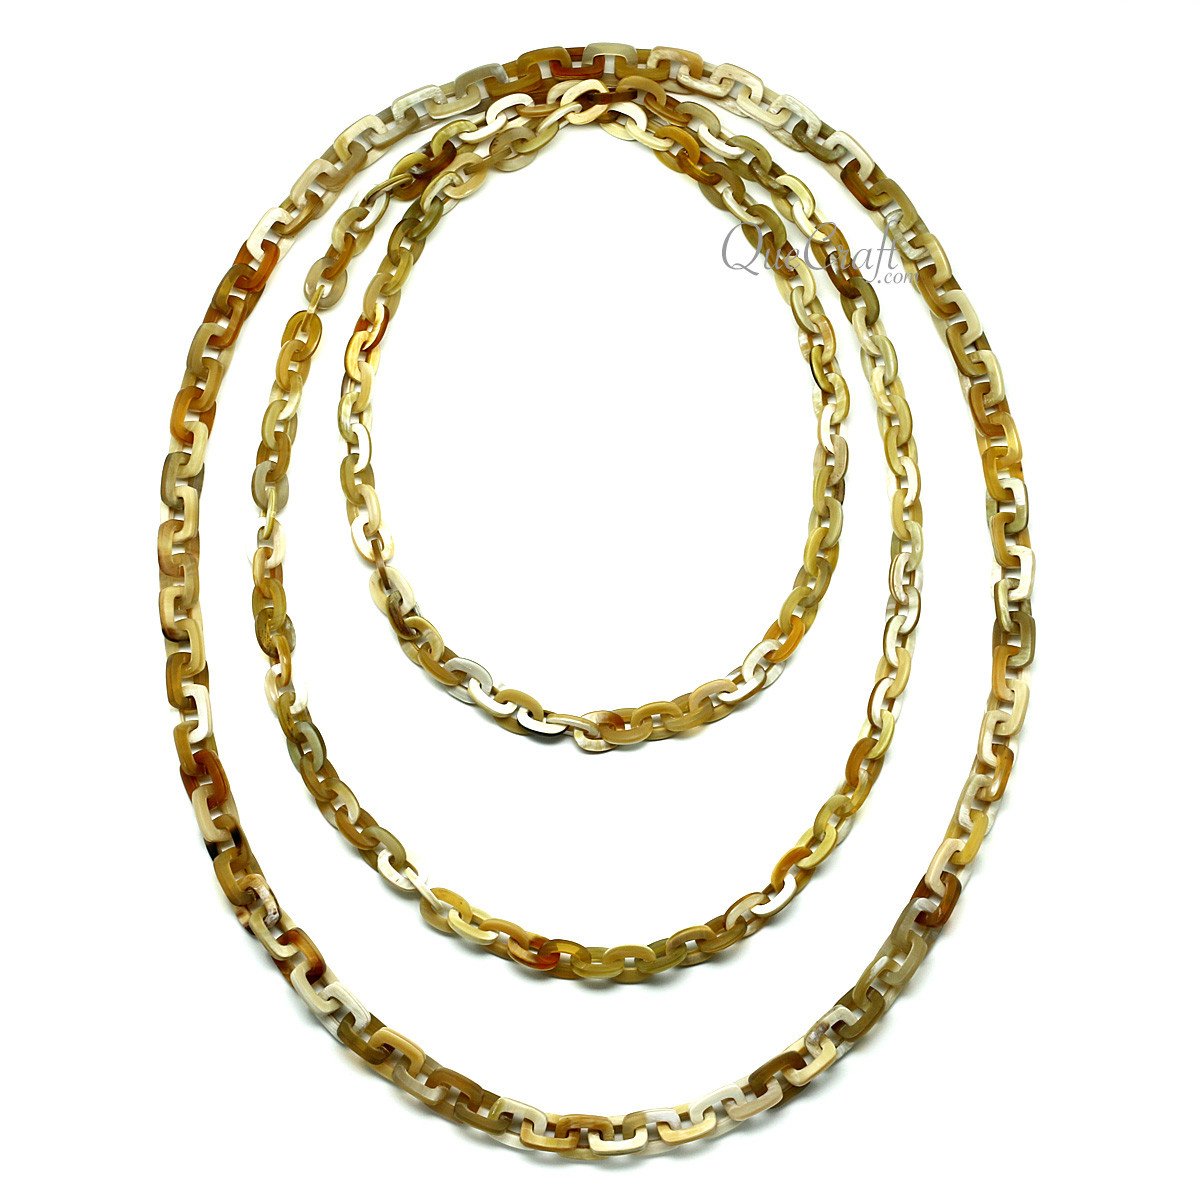 Horn Chain Necklace #11917 - HORN JEWELRY